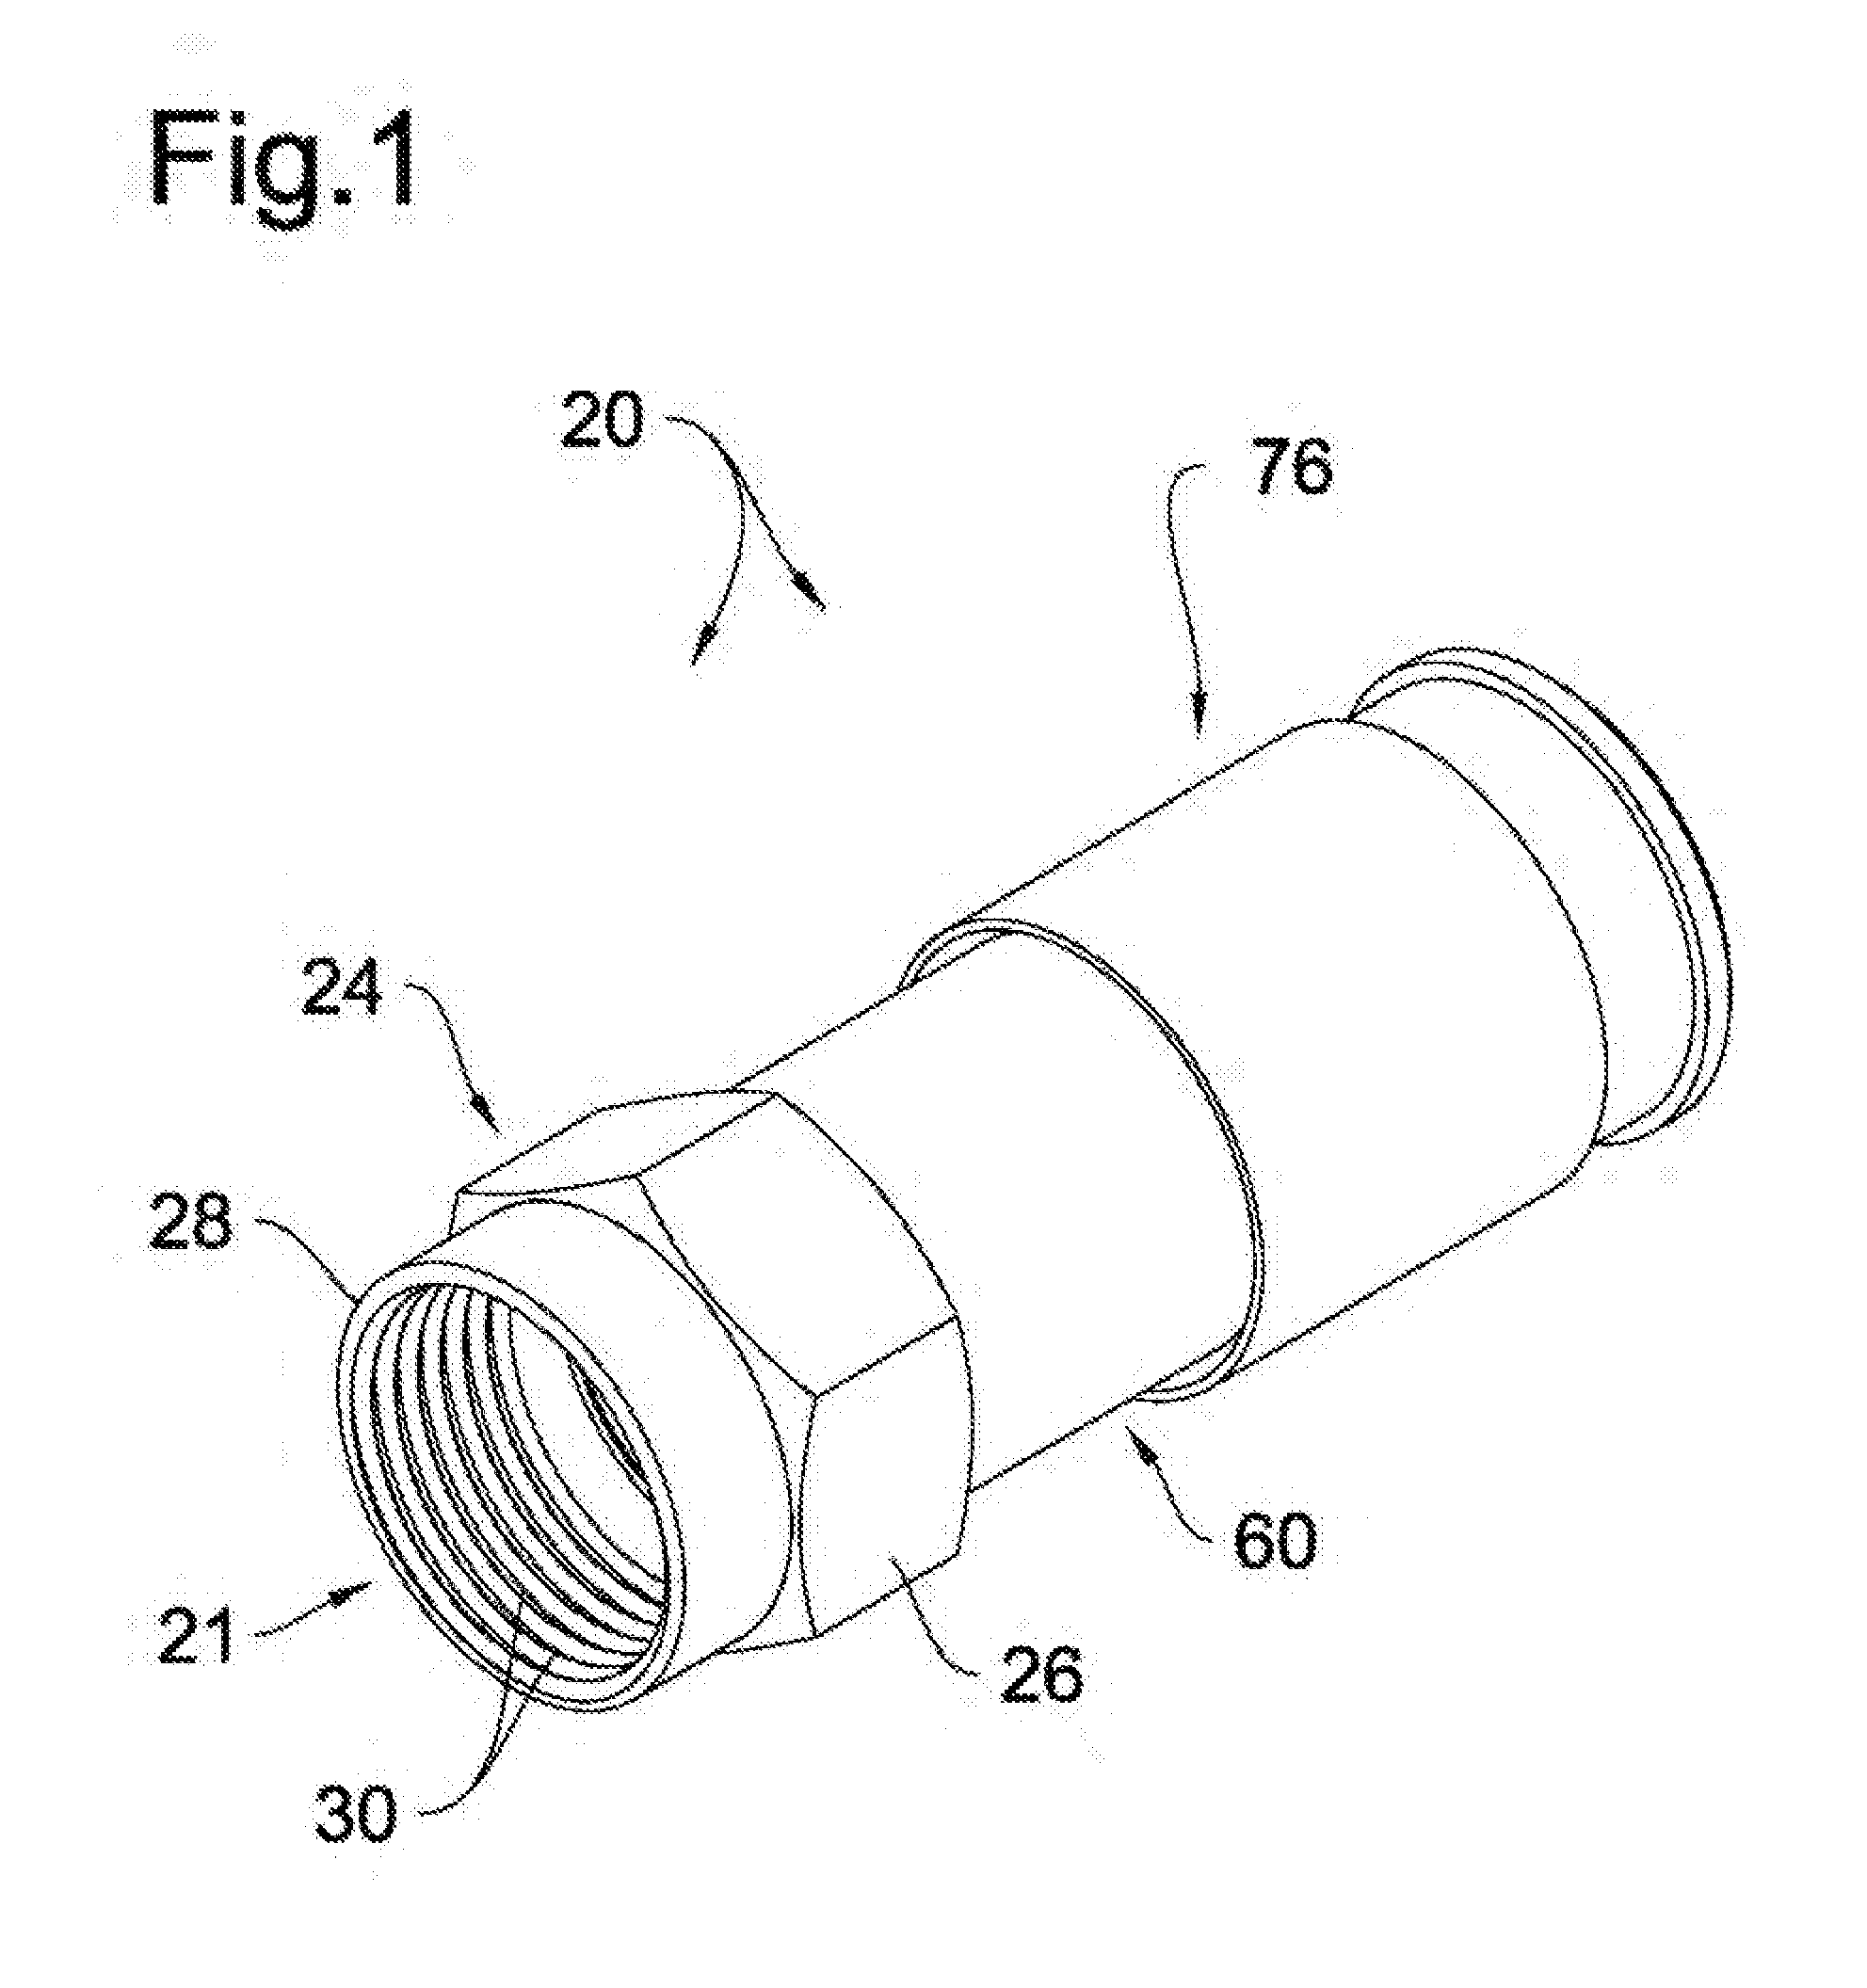 Coaxial connector with grommet biasing for enhanced continuity